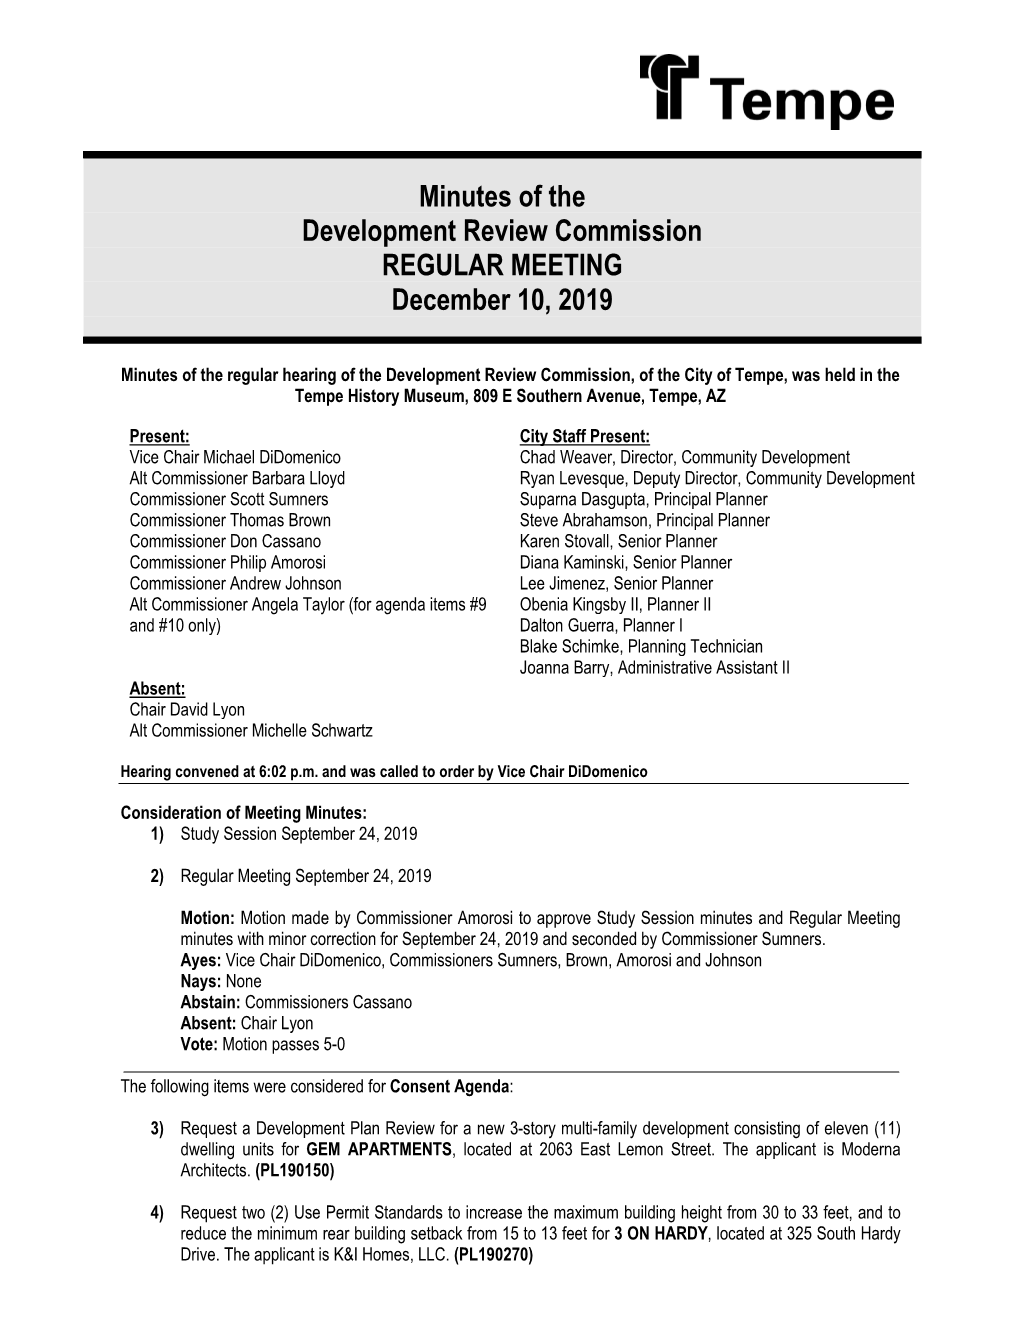 Minutes of the Development Review Commission REGULAR MEETING December 10, 2019